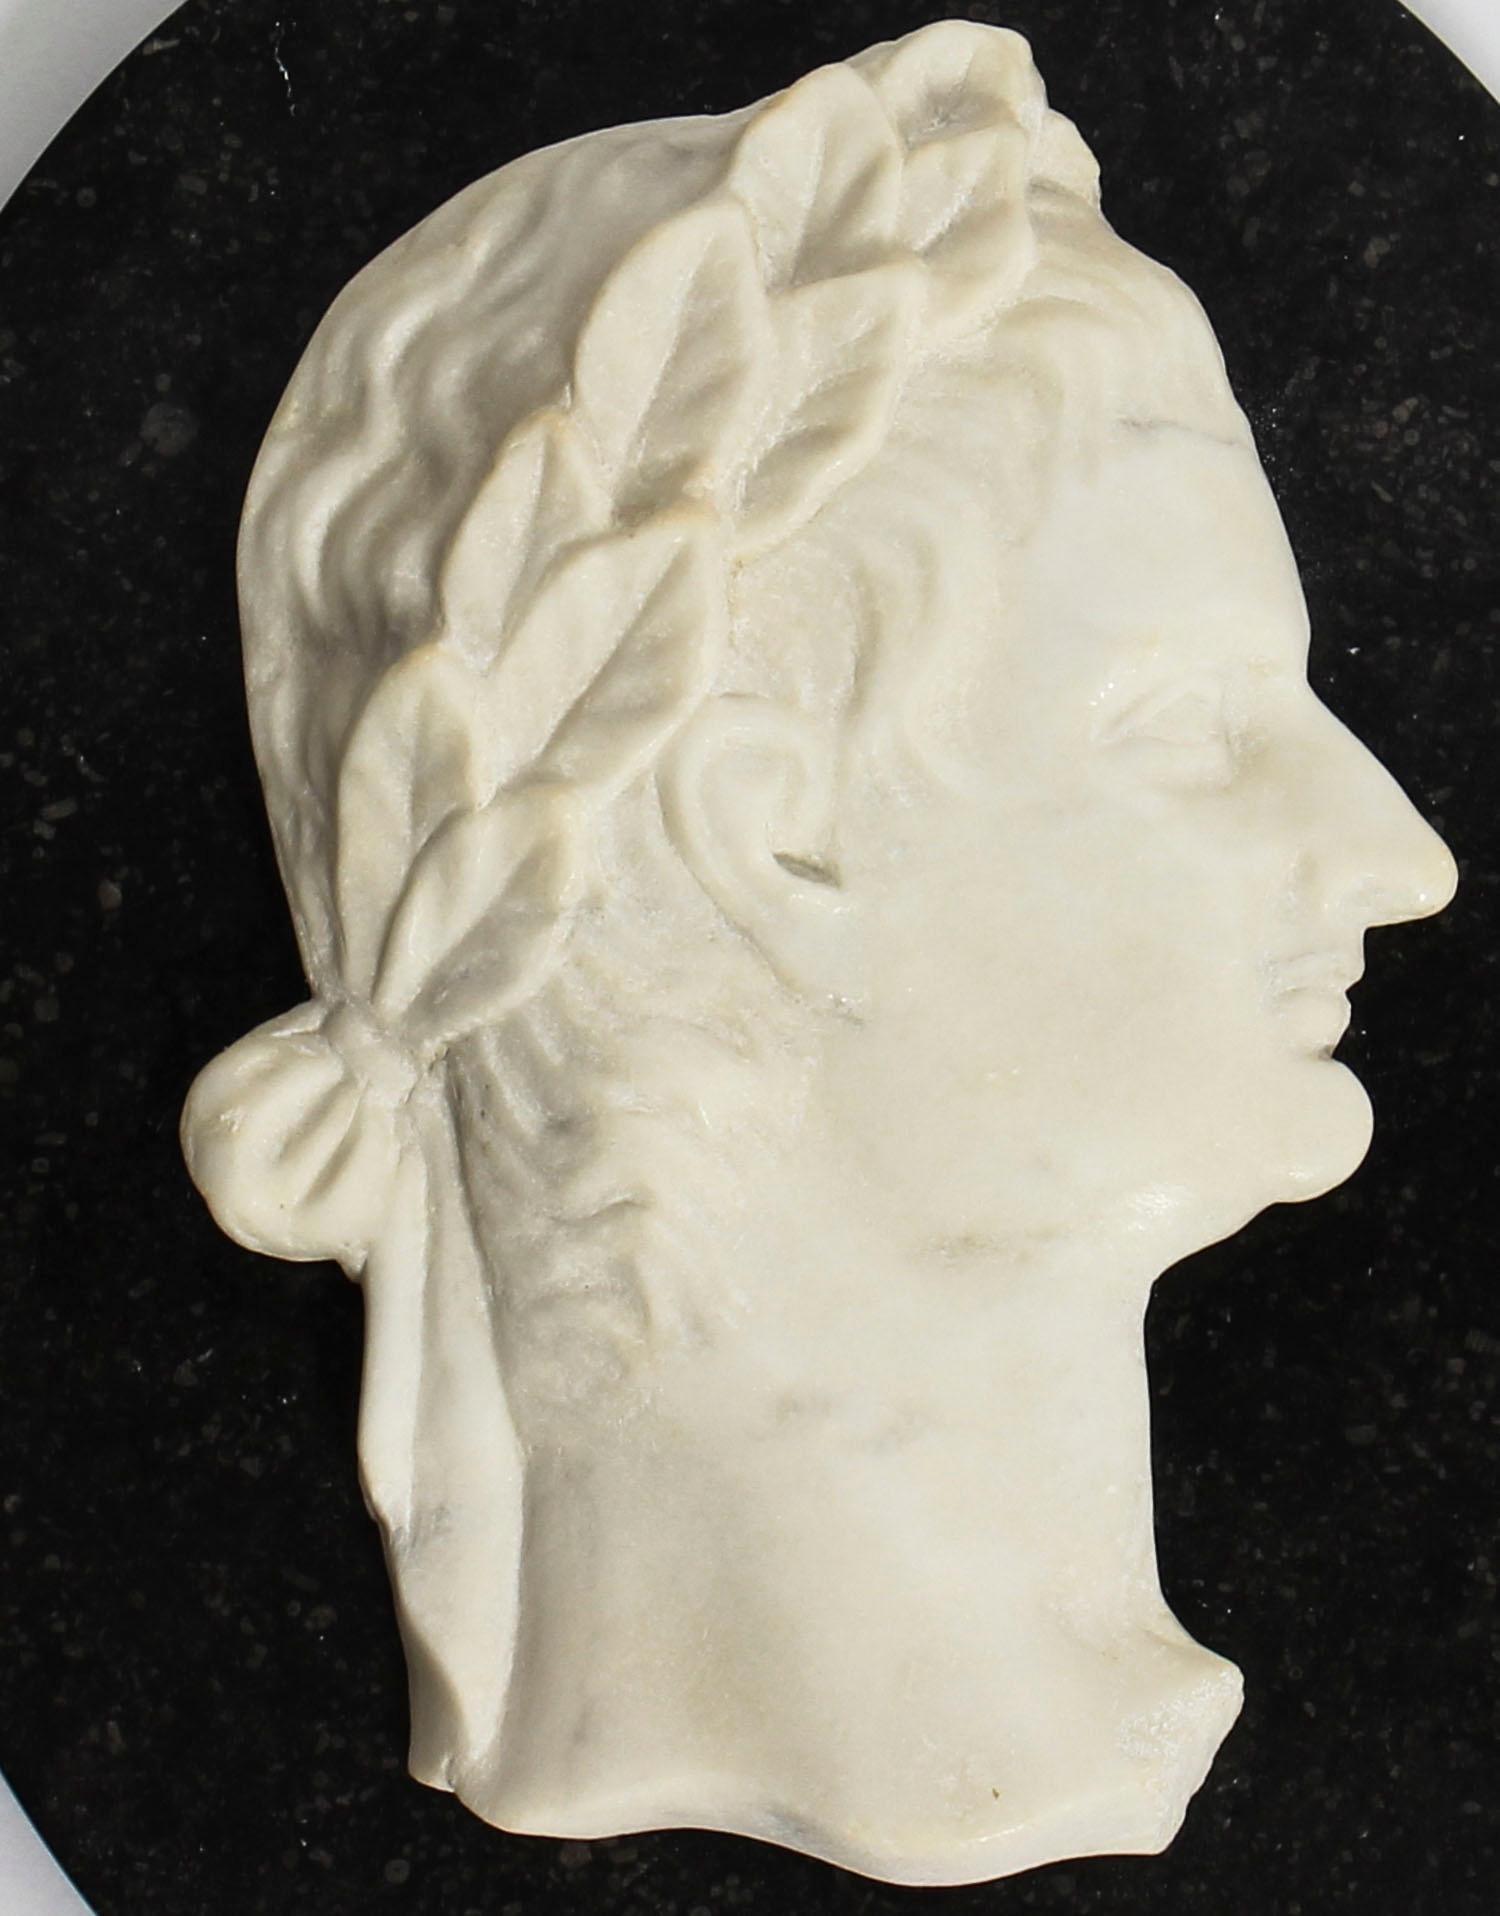 This is a beautiful Italian white Carrara marble profile bust of the Roman Emperor Claudius, dating from the mid-19th century.

The sensitively carved Grand Tour plaque depicts the profile of Claudius with a laurel wreath in his hair on an oval